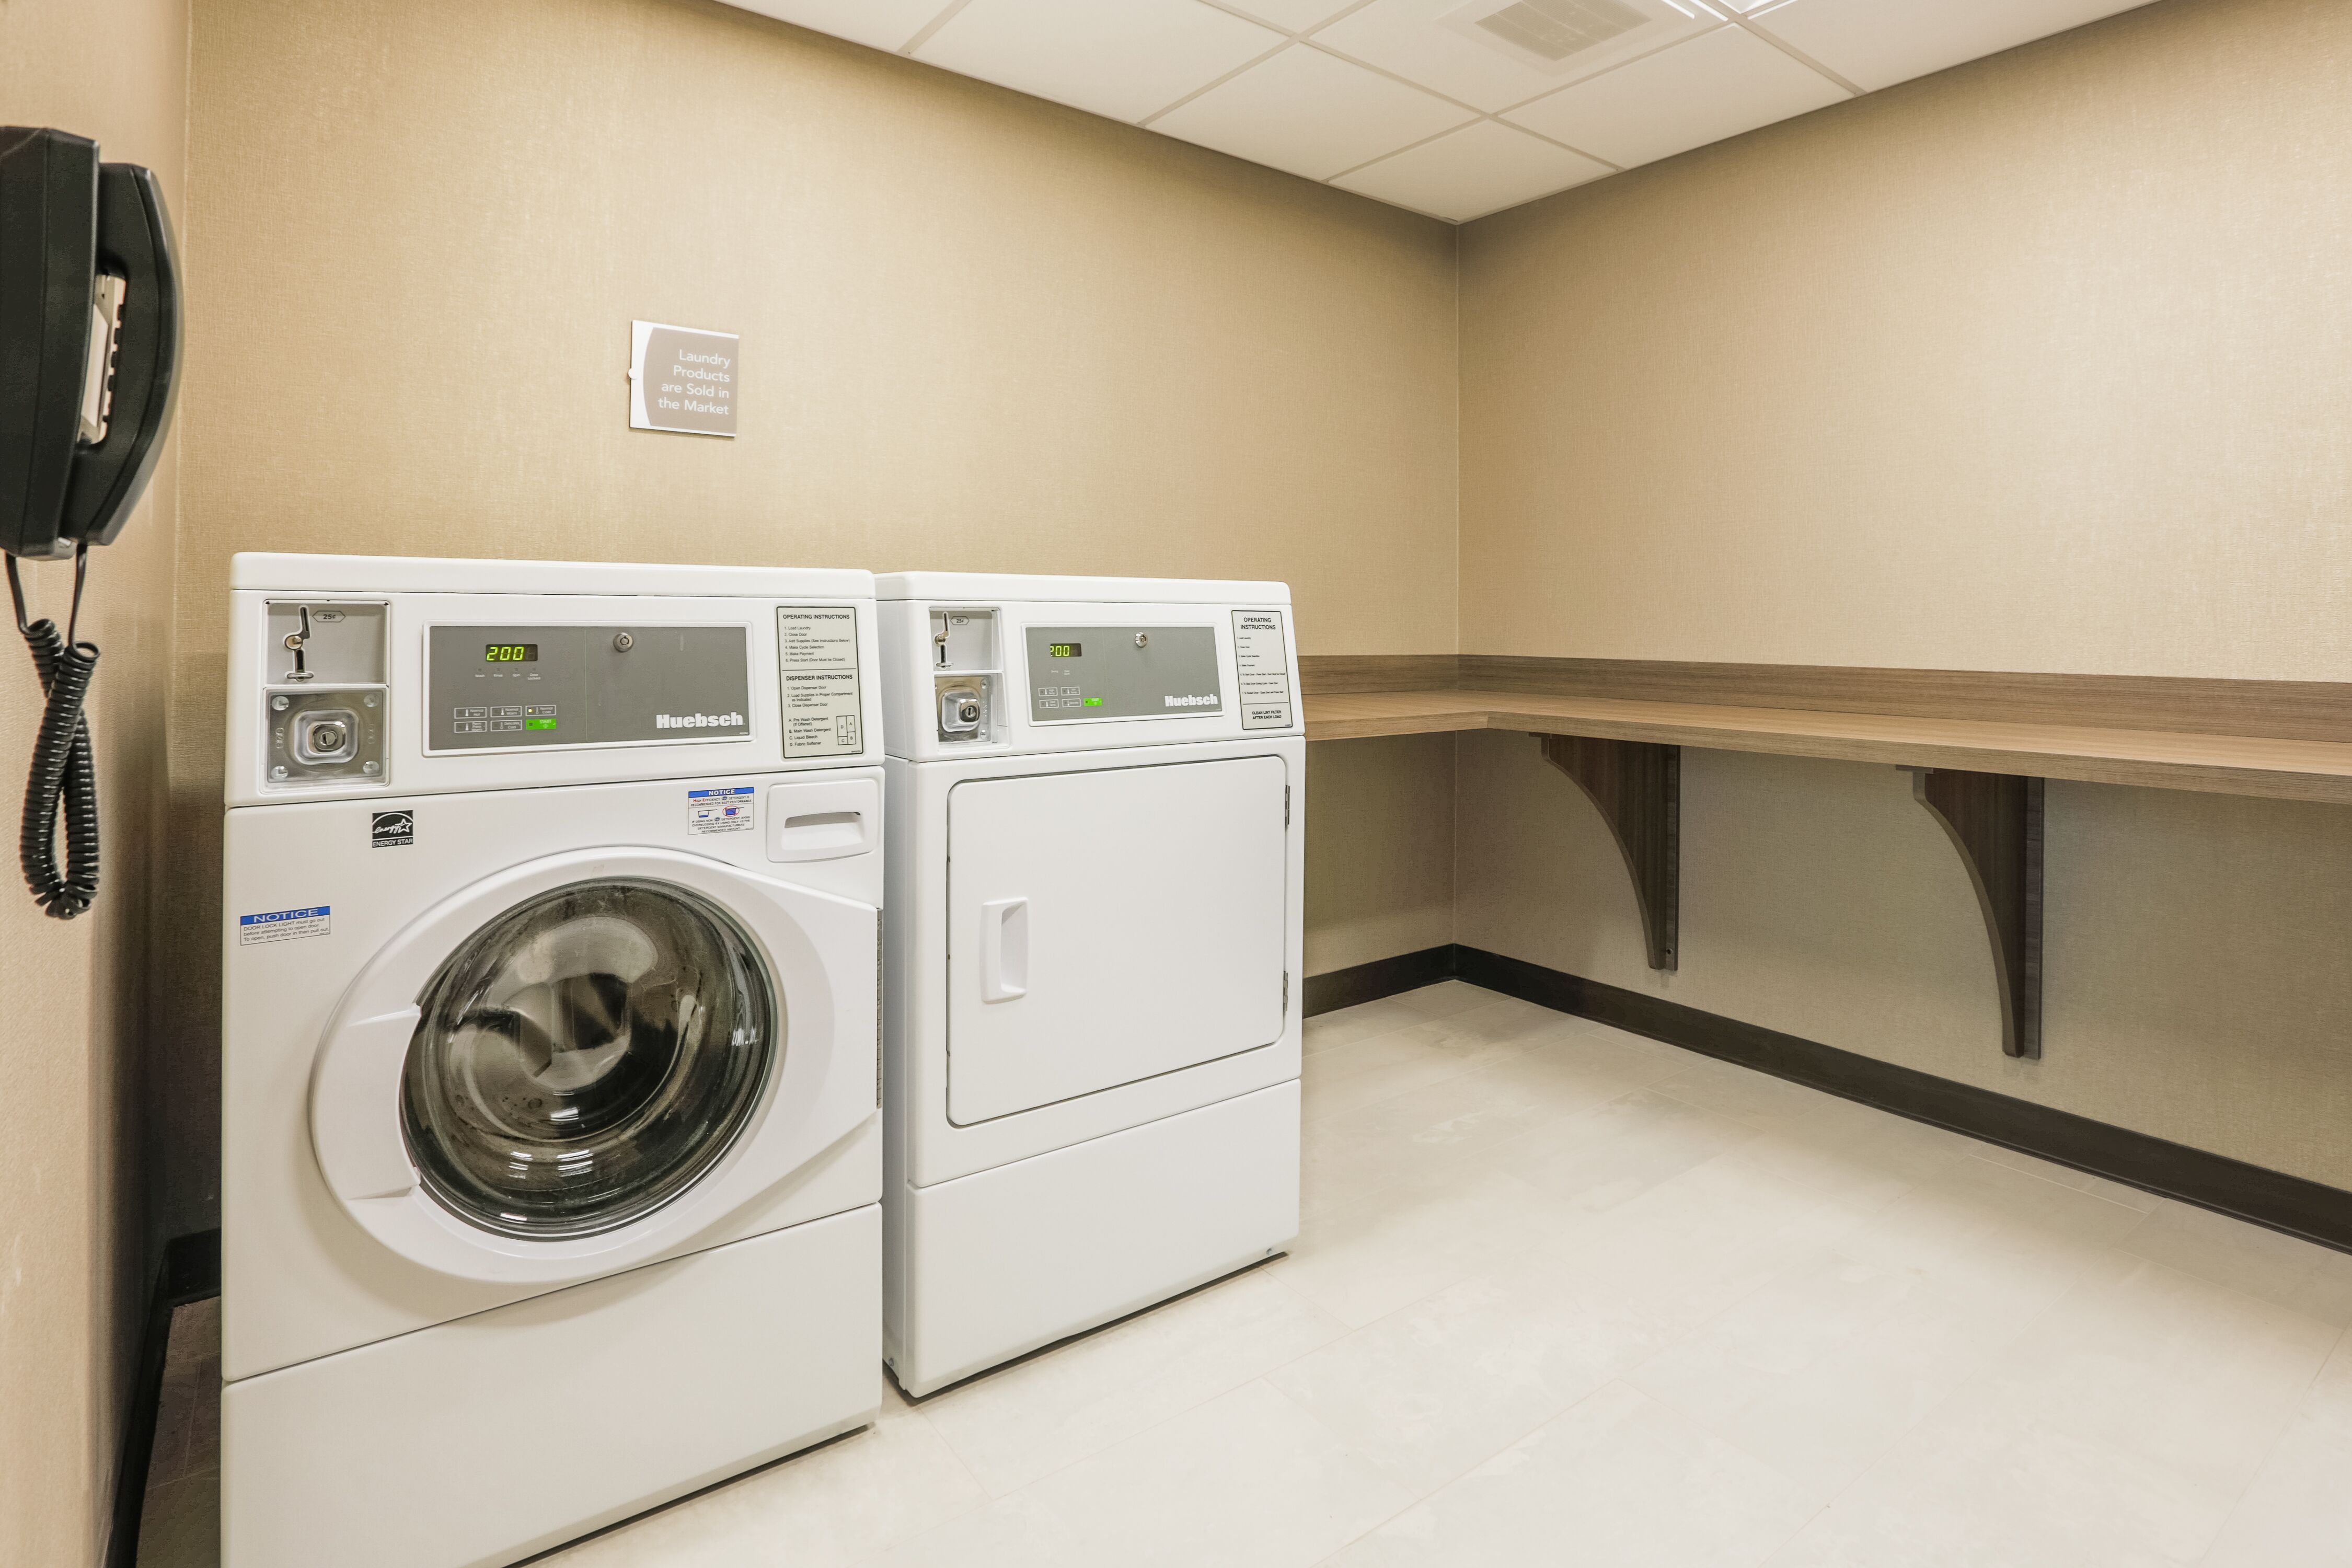 Guest Laundry Room with Wall Phone, Washer, Dryer and Wall Mounted Folding Table